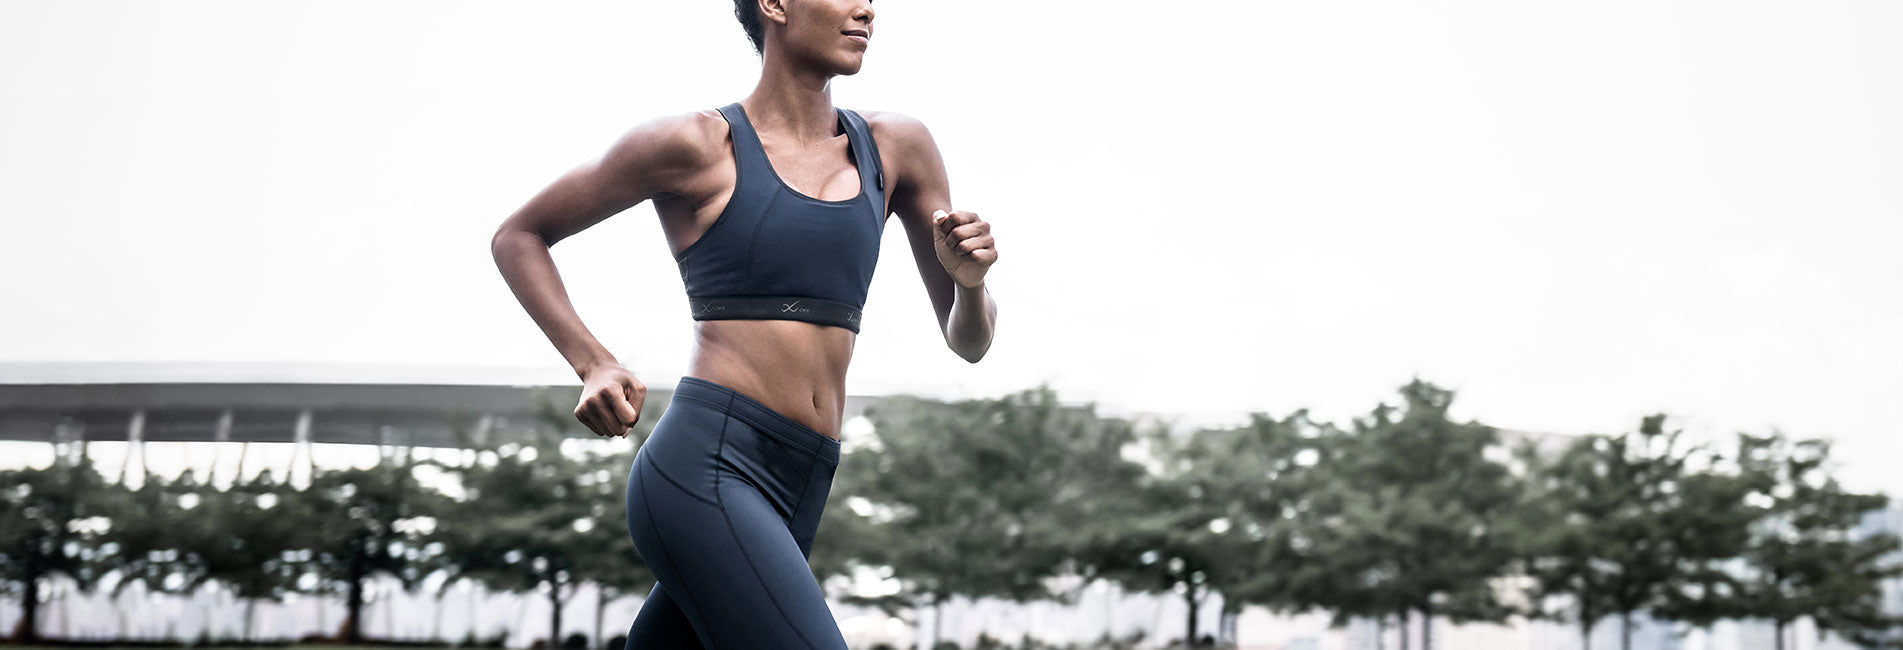 Tips: How to pick the best Sports Bra for all workouts